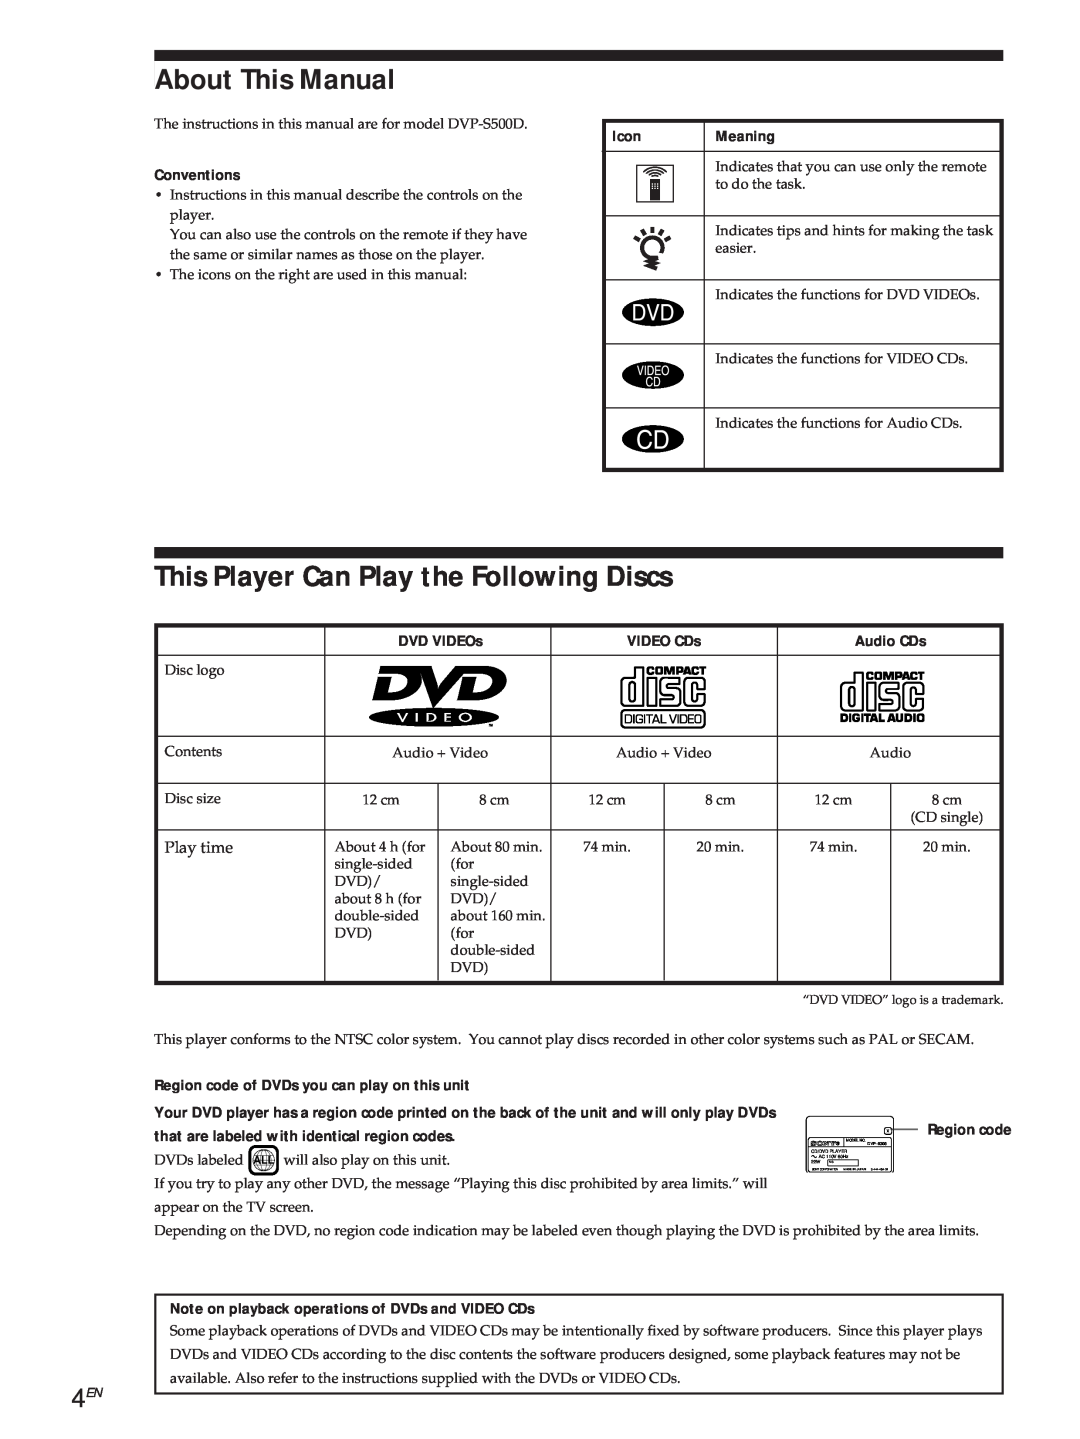 Sony DVP-S500D About This Manual, This Player Can Play the Following Discs, Getting Started, Conventions, Icon, Meaning 